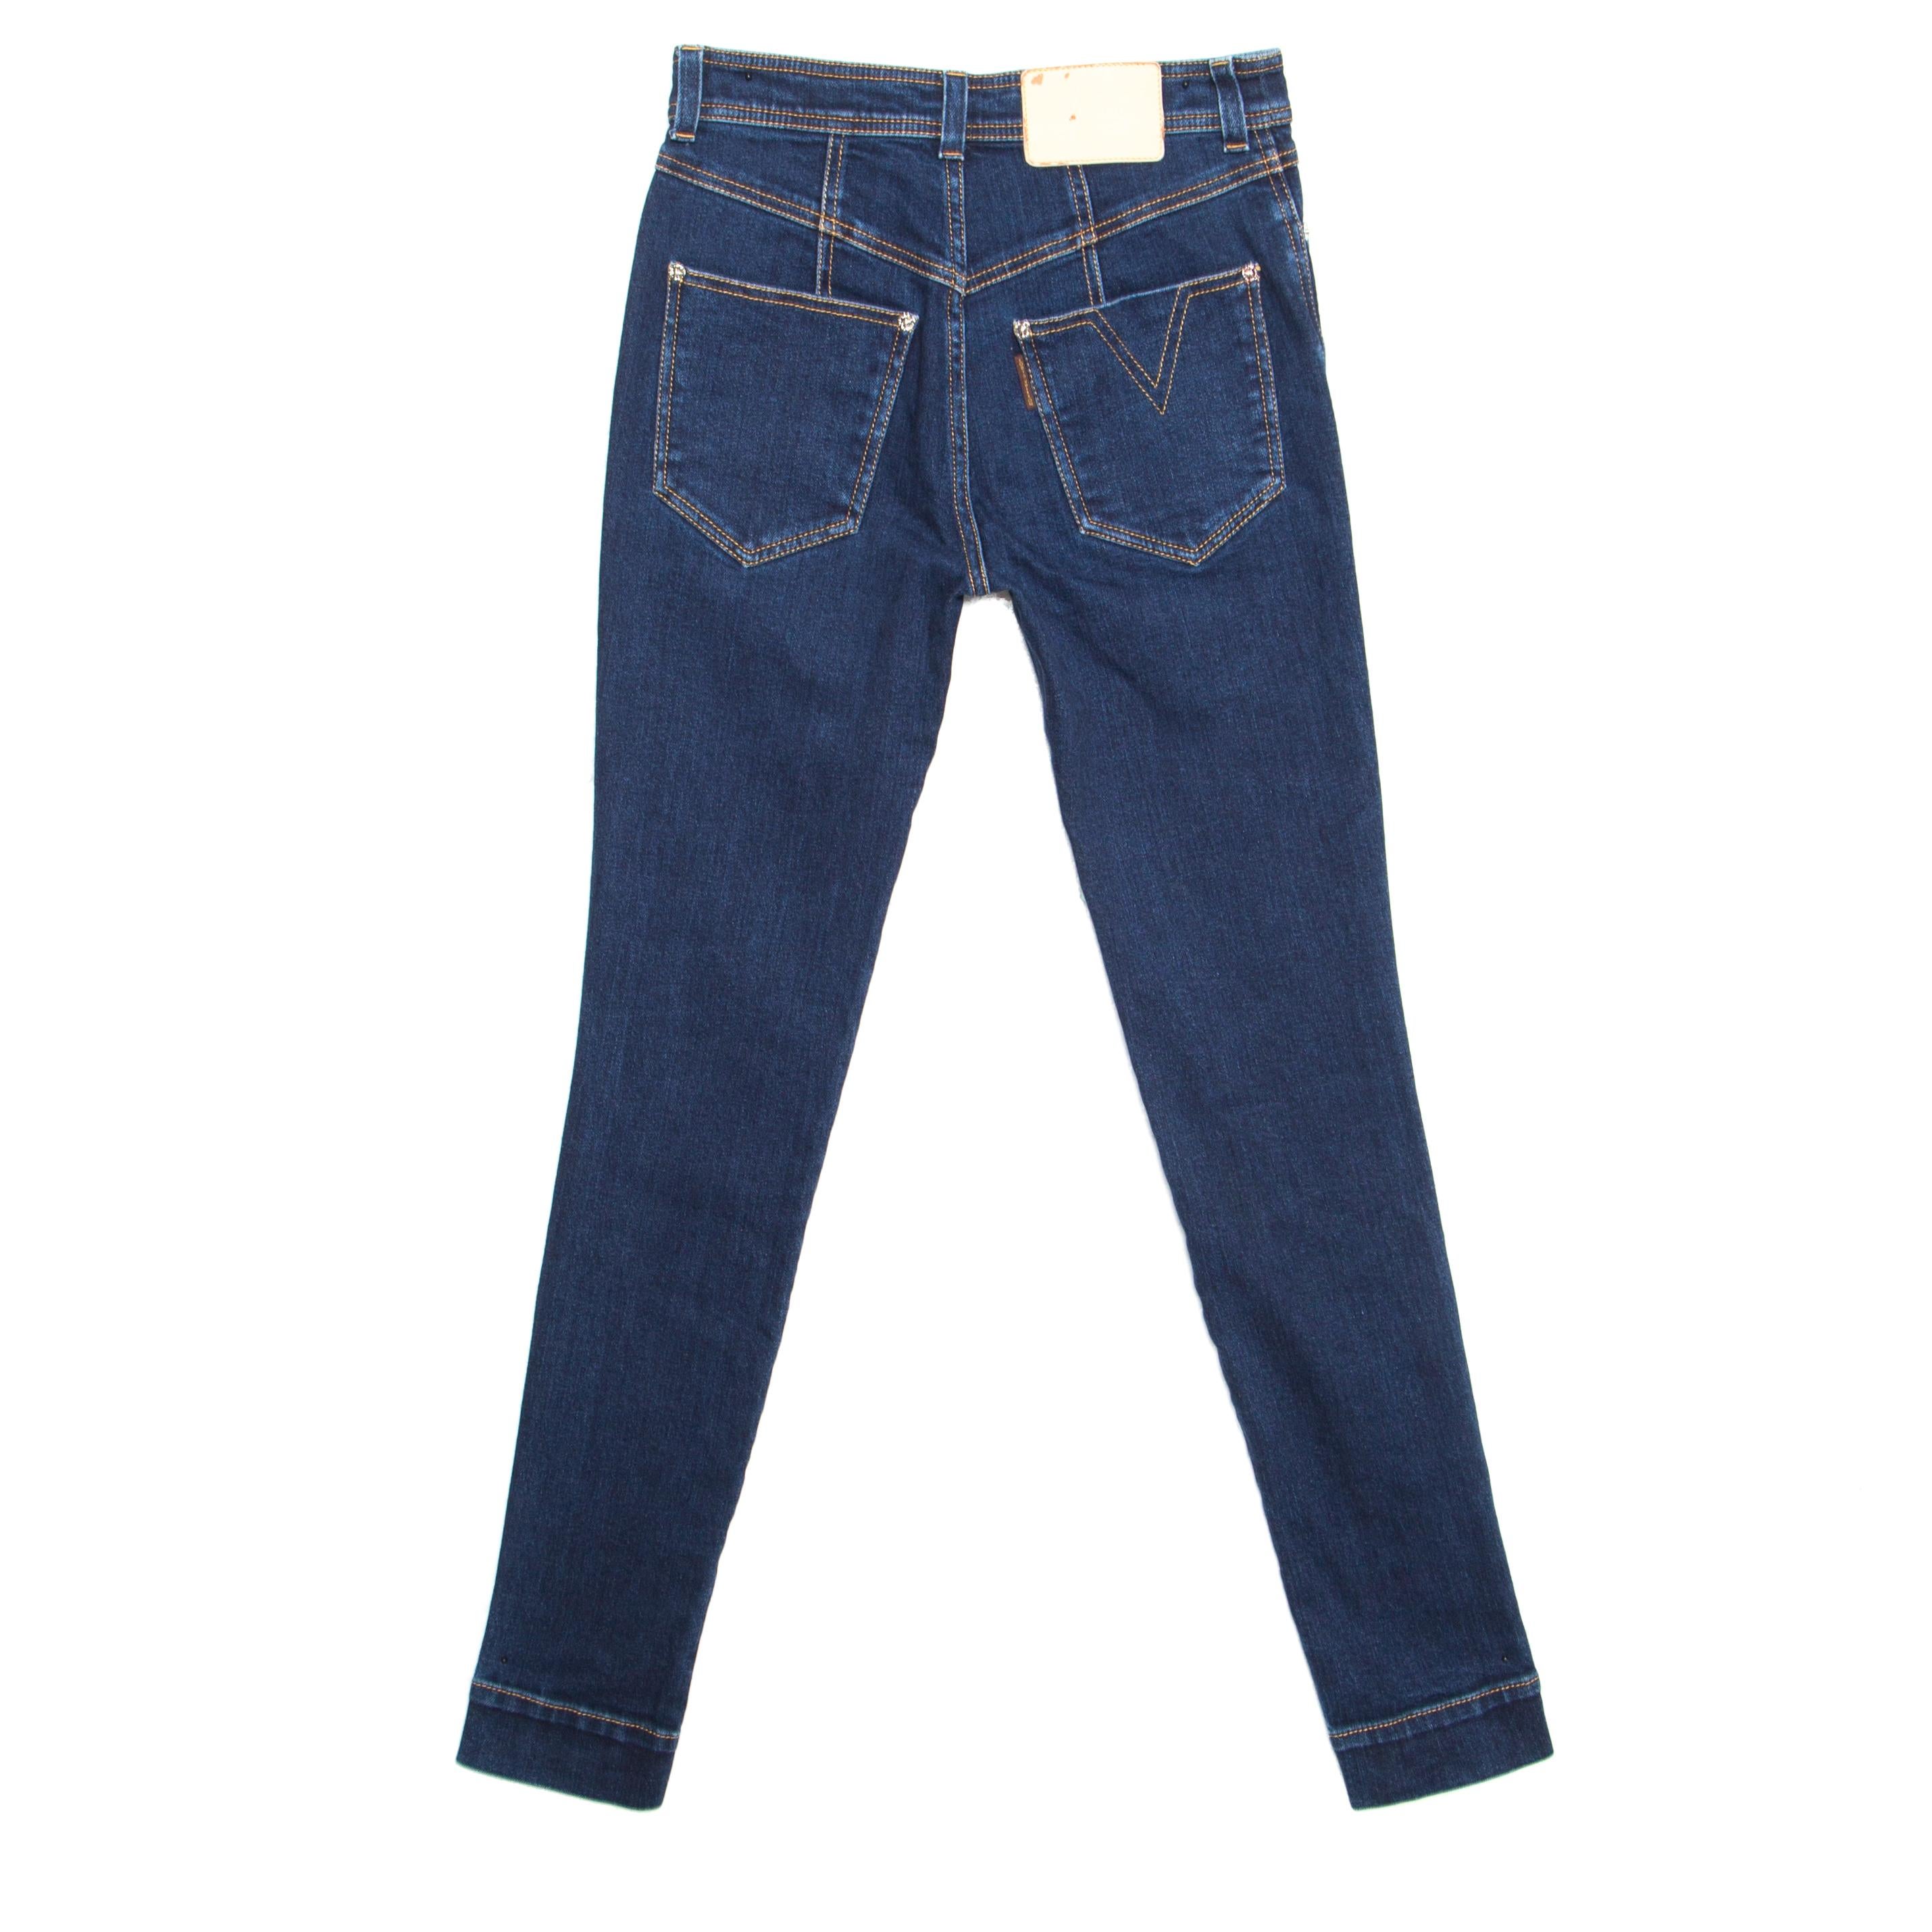  Designed to look fabulous and lend you a great fit, these skinny jeans from Louis Vuitton are a must buy! The Indigo dark washed jeans are made of a cotton blend and feature a front button fastening, belt loop closures and front and back pockets.